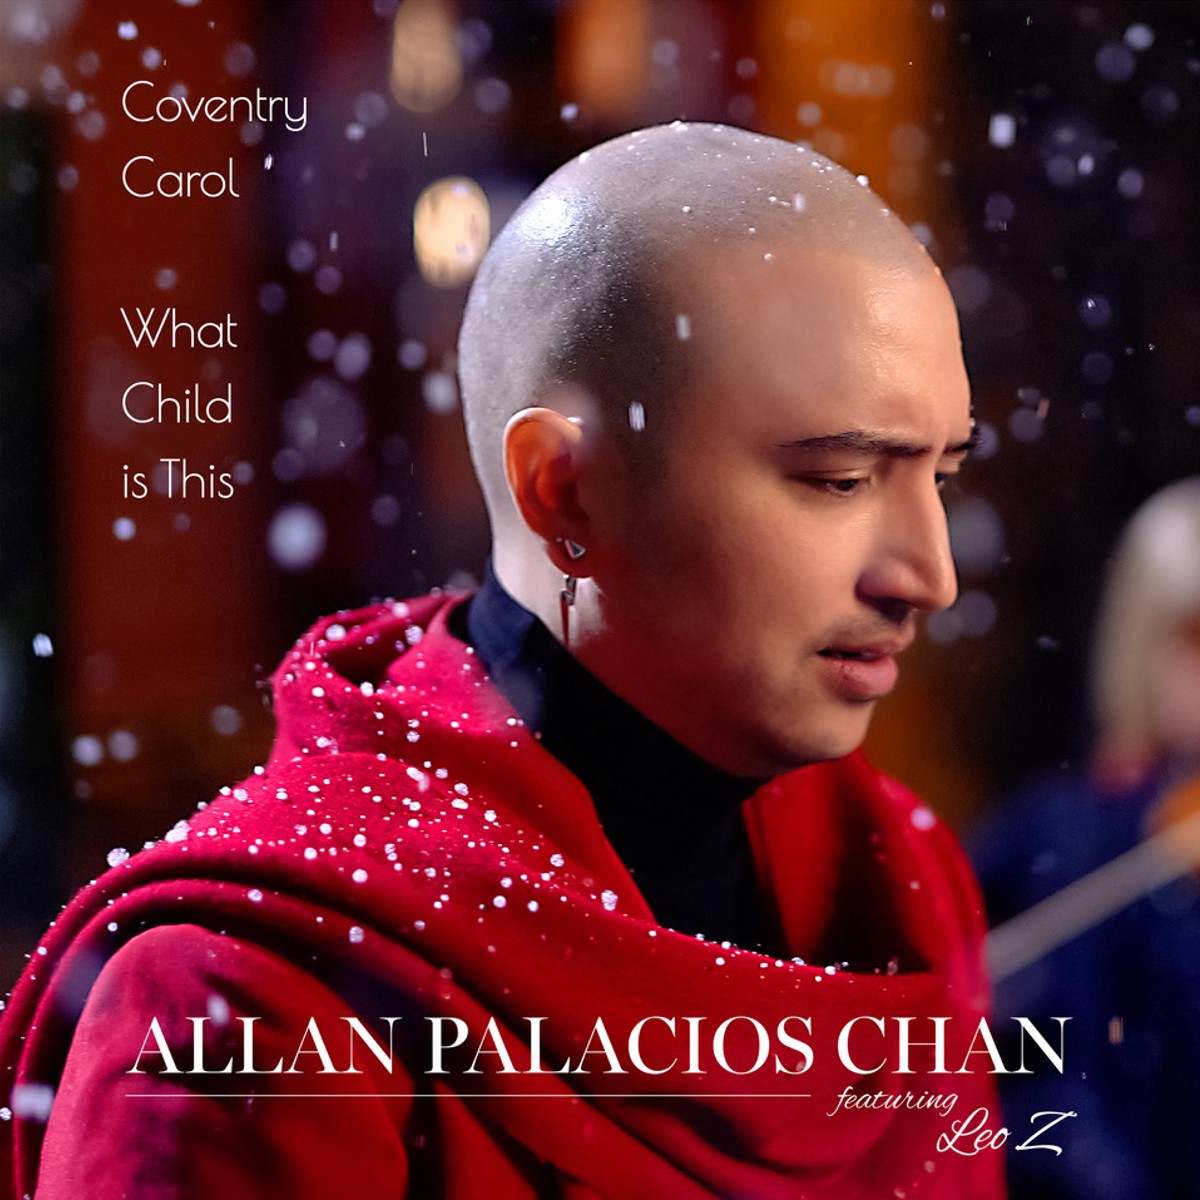 Allan Palacios Chan “Coventry Carol/What Child is This” single artwork